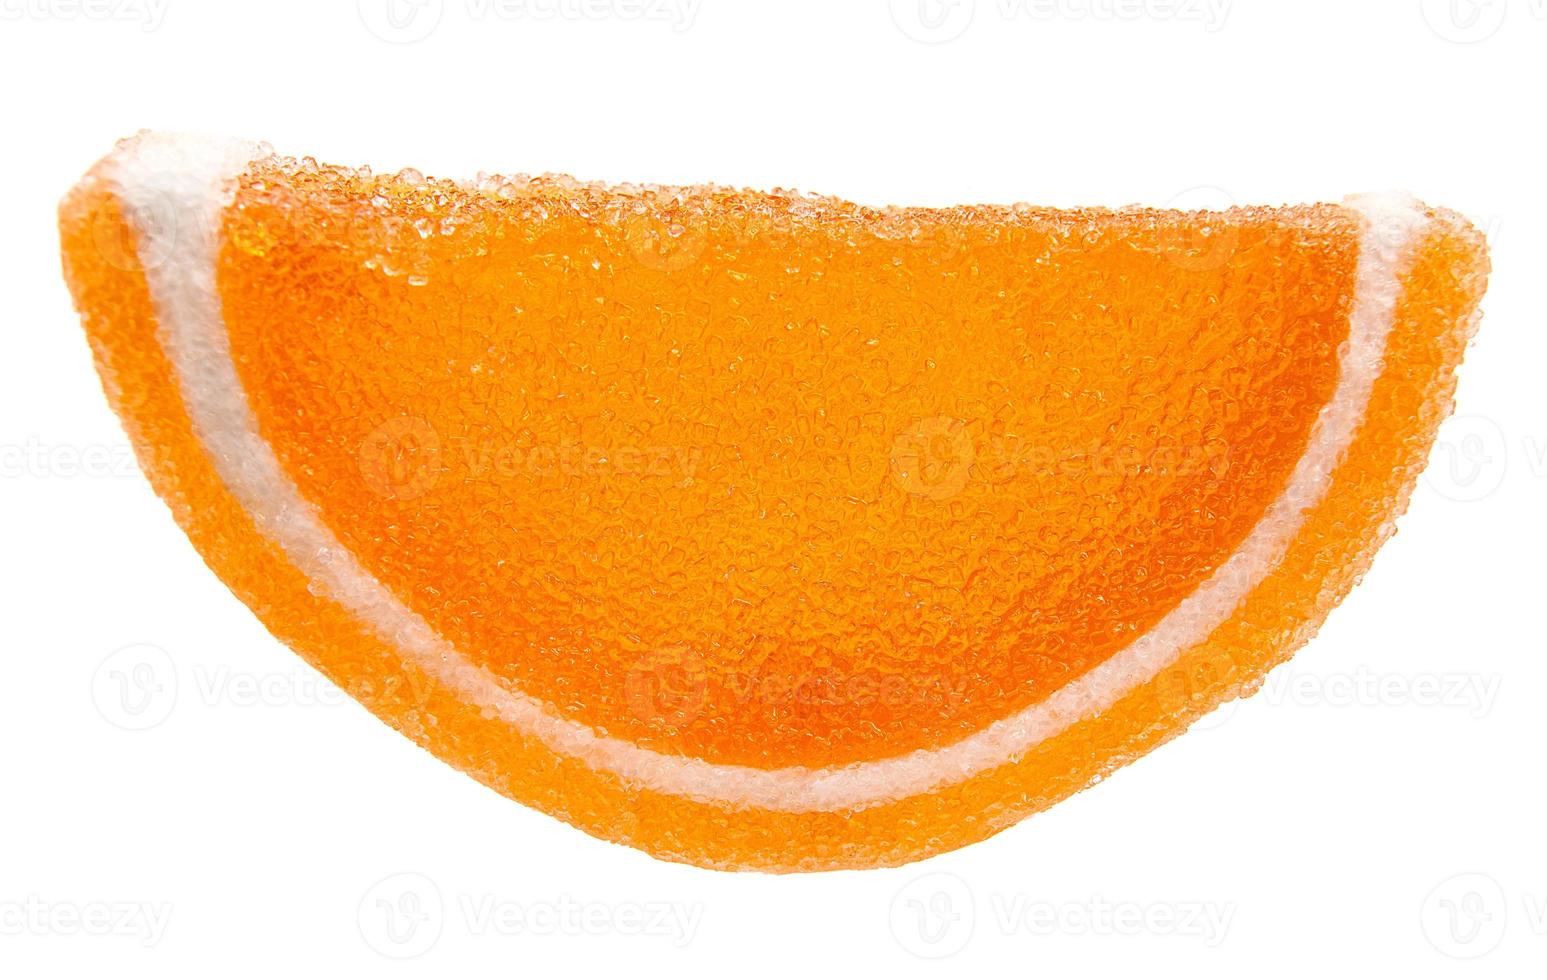 marmalade candy in the form of a slice of orange. photo